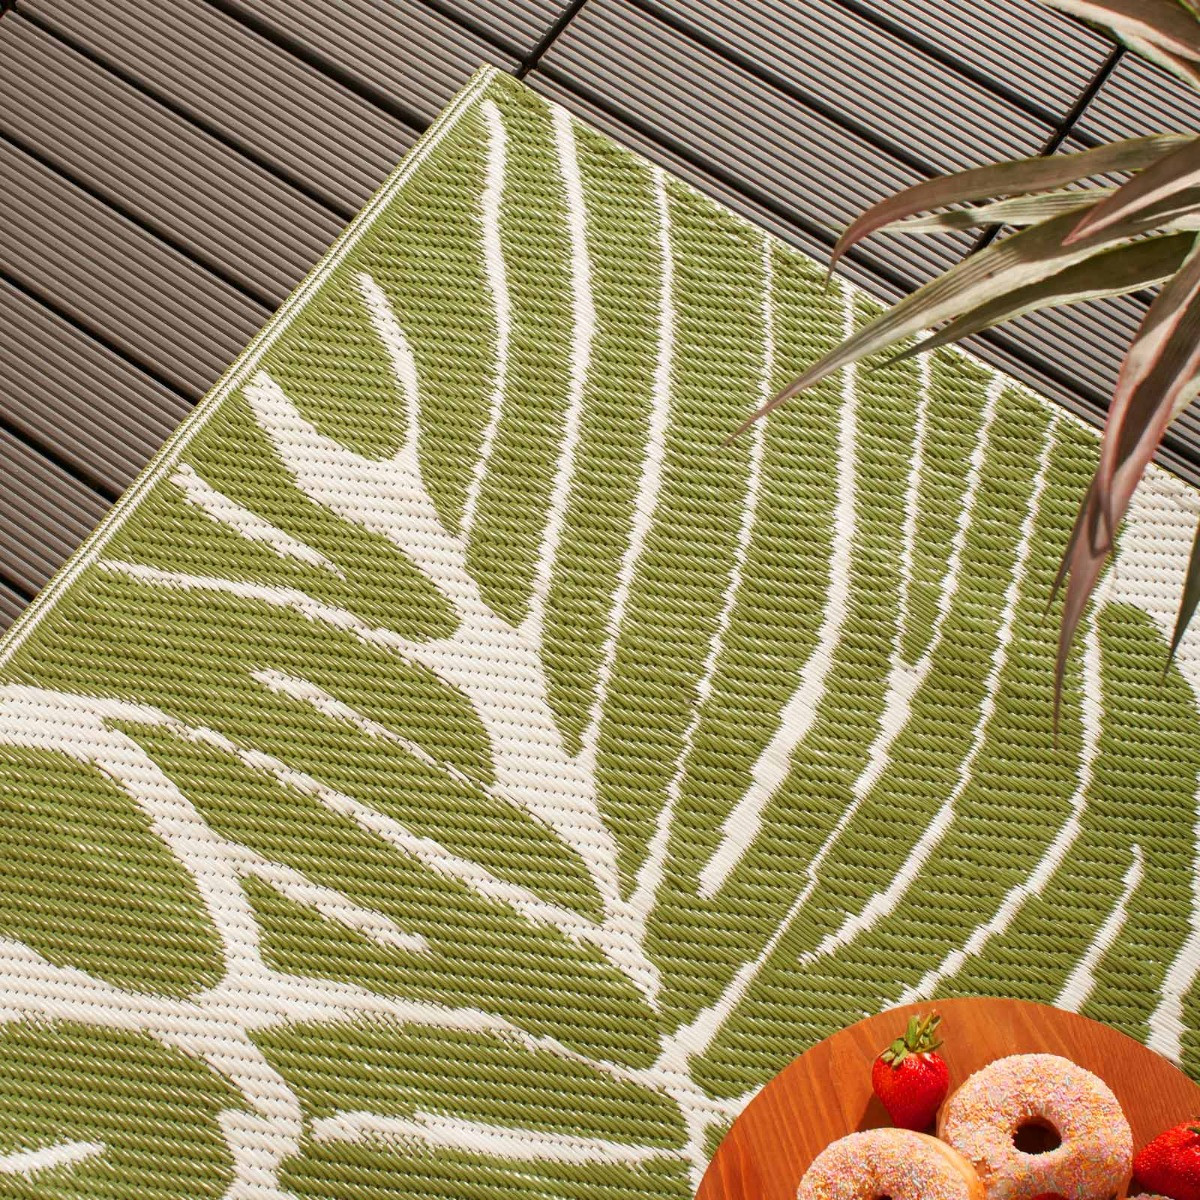 OHS Tropical Print Reversible Outdoor Rug, Green/White - 120 x 170cm>